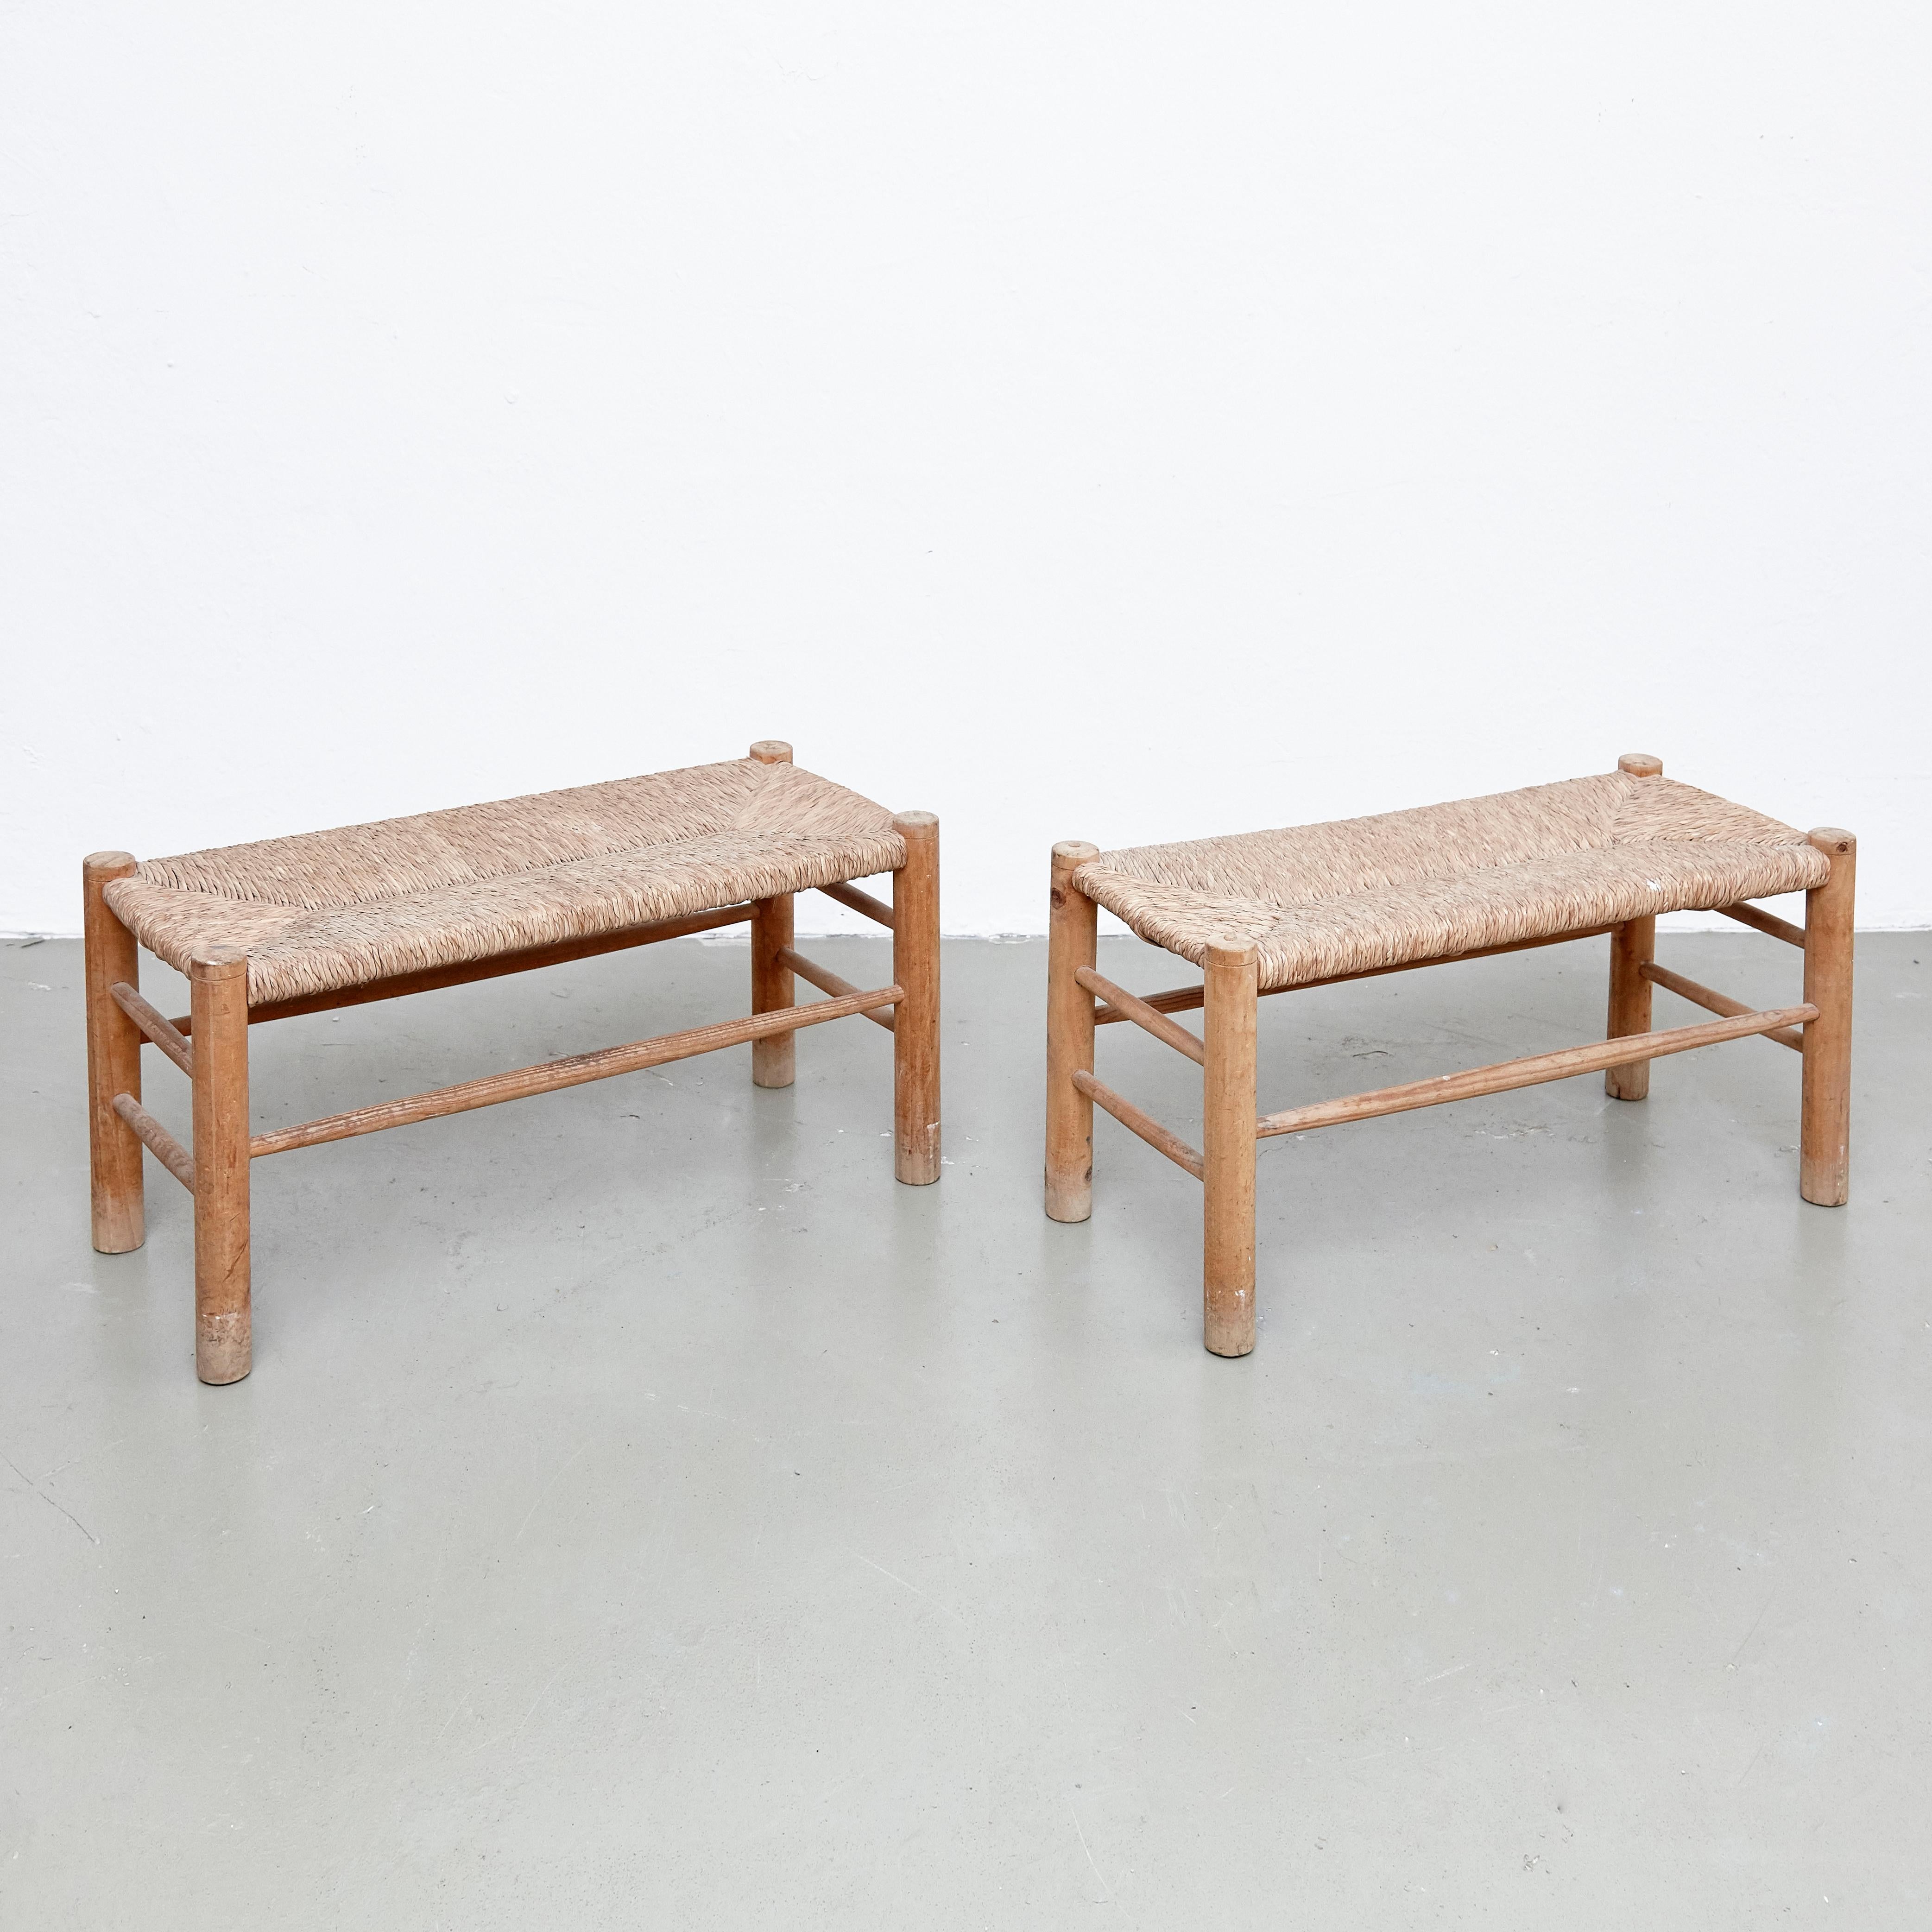 Bench designed in the style of Charlotte Perriand, made by unknown manufacturer. 

Wood and rattan. 

In good original condition, with minor wear consistent with age and use, preserving a beautiful patina. 

Charlotte Perriand (1903-1999) she